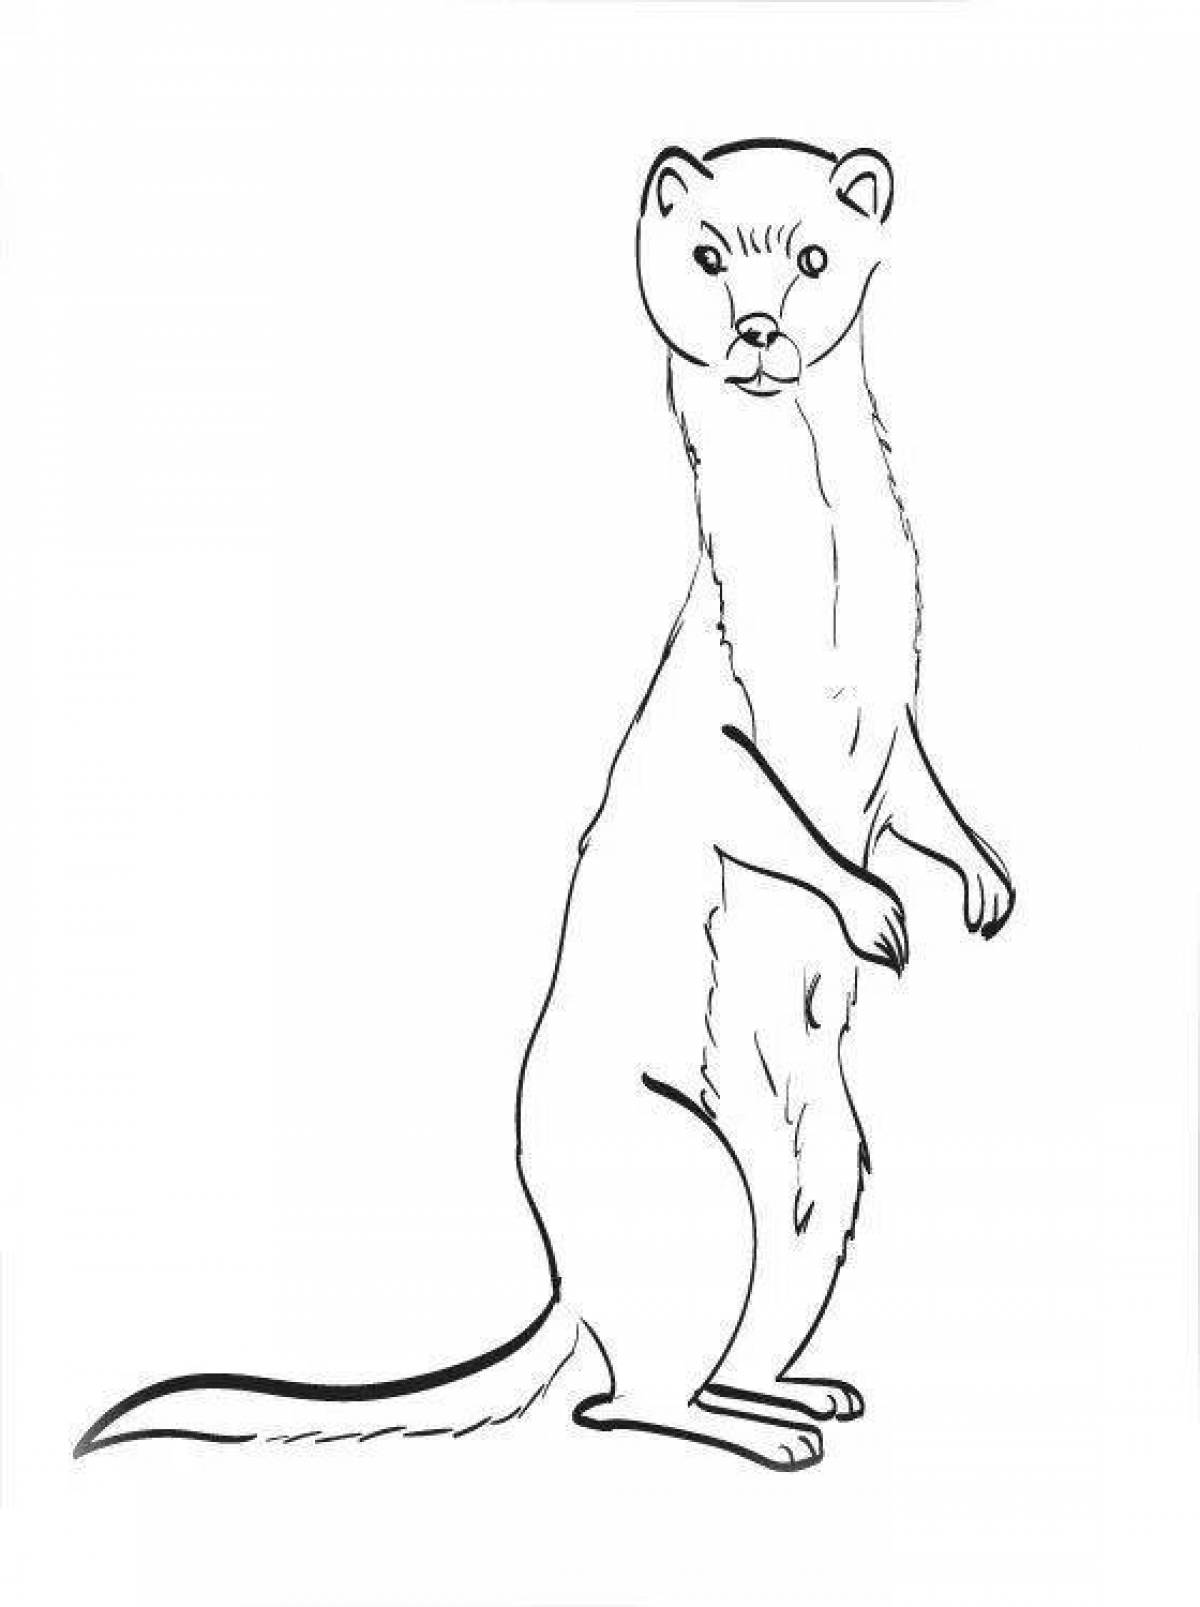 Coloring book ferret for kids